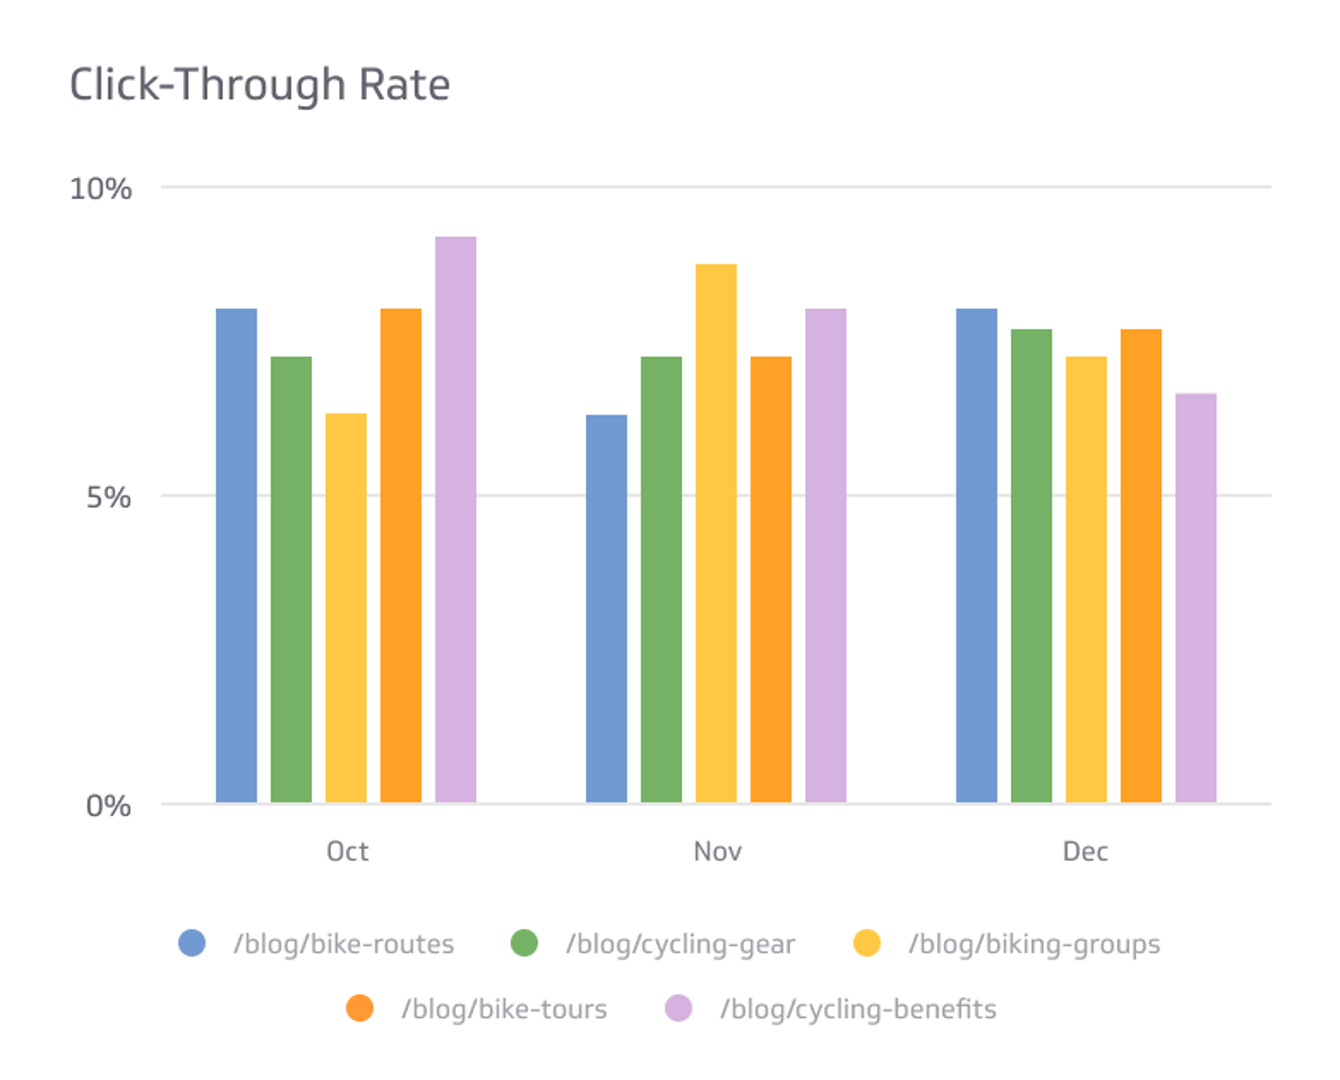 What is the Click-through rate (CTR)?